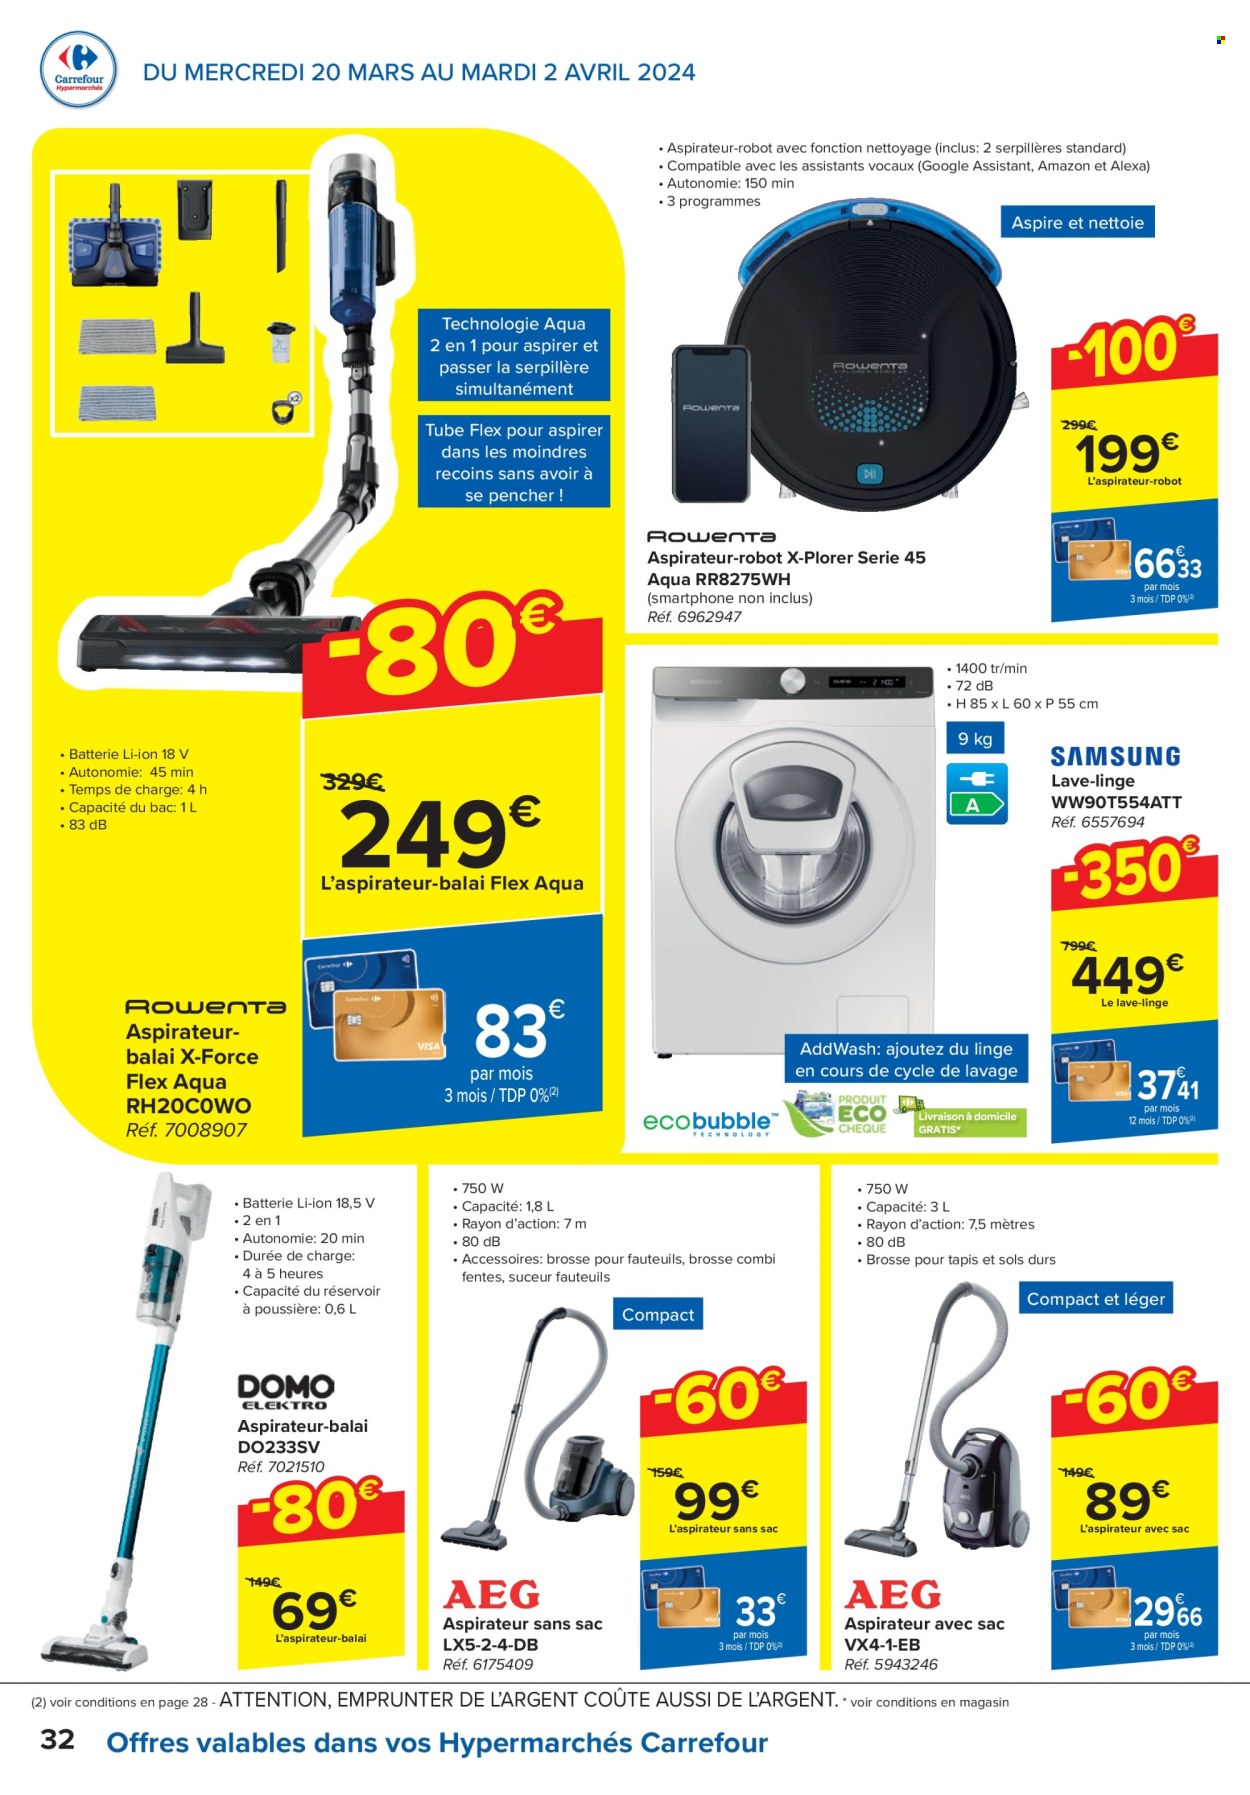 Catalogue Carrefour hypermarkt - 20.3.2024 - 2.4.2024. Page 32.